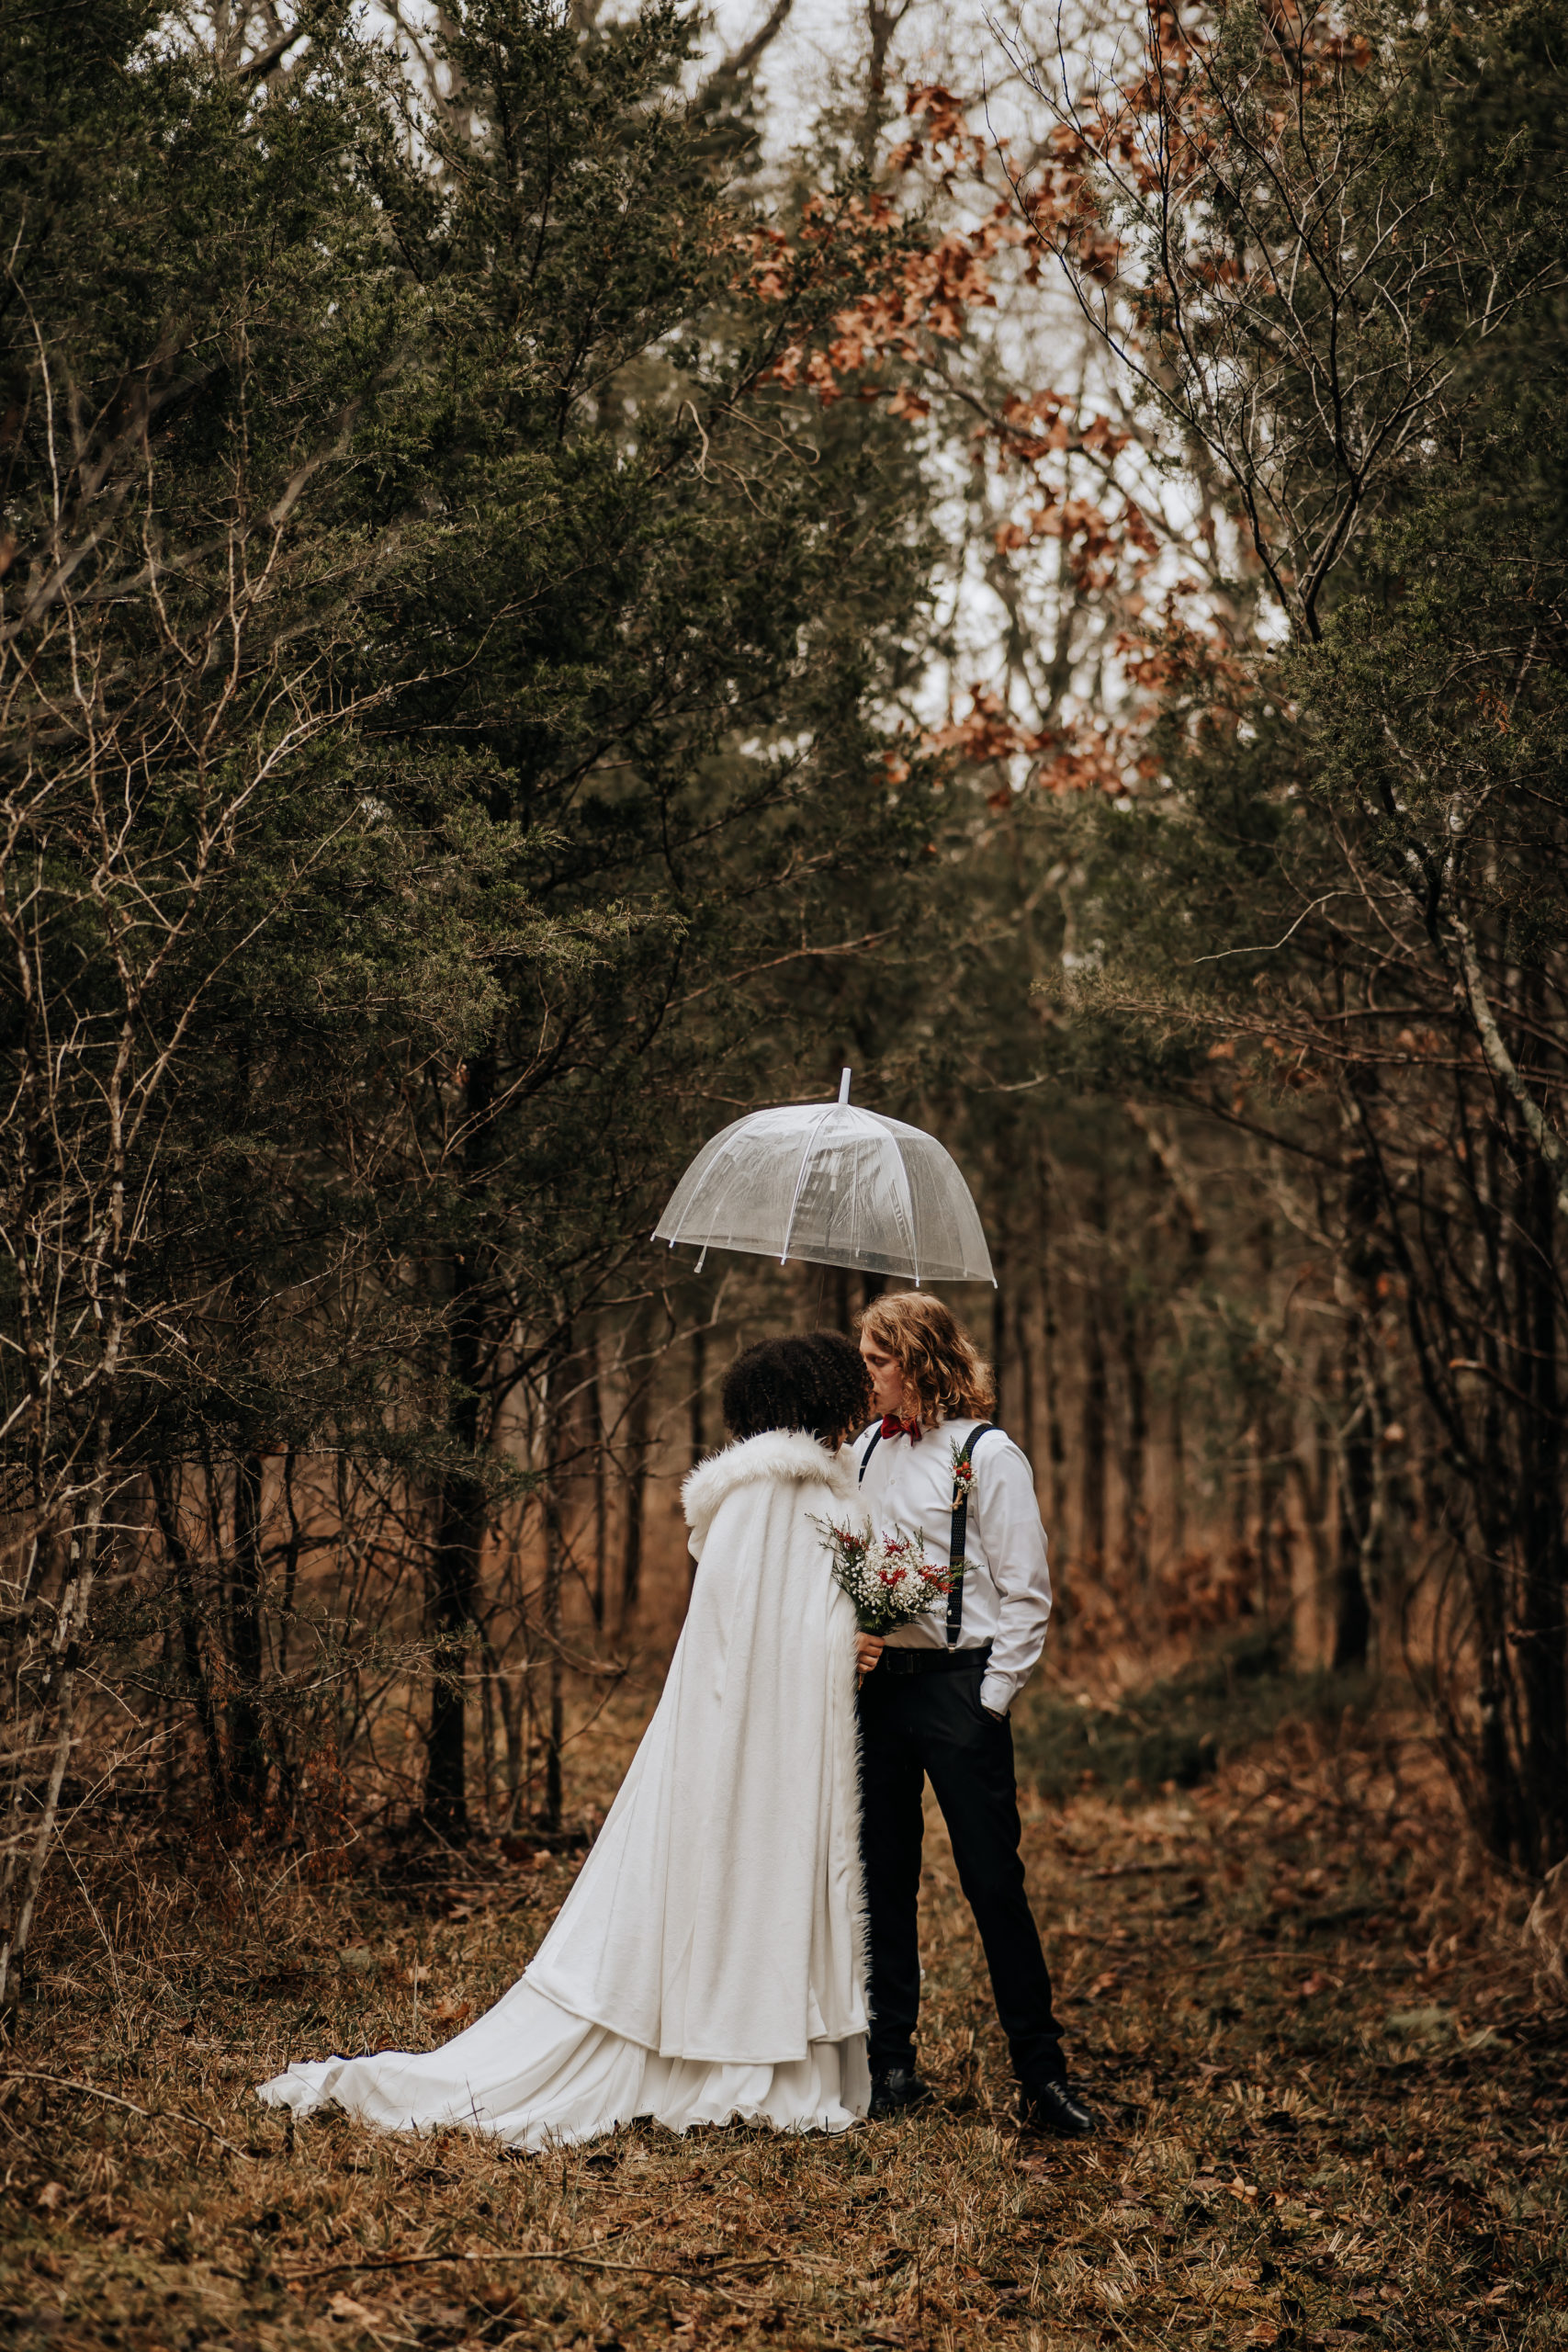 A couple standing facing each other, they are wearing their wedding attire, the bride has a beautiful white cape on with a hood. You can tell it's raining because they are holding a clear umbrella above their heads. You can see their entire bodies as well as the wooded landscape that surrounds them